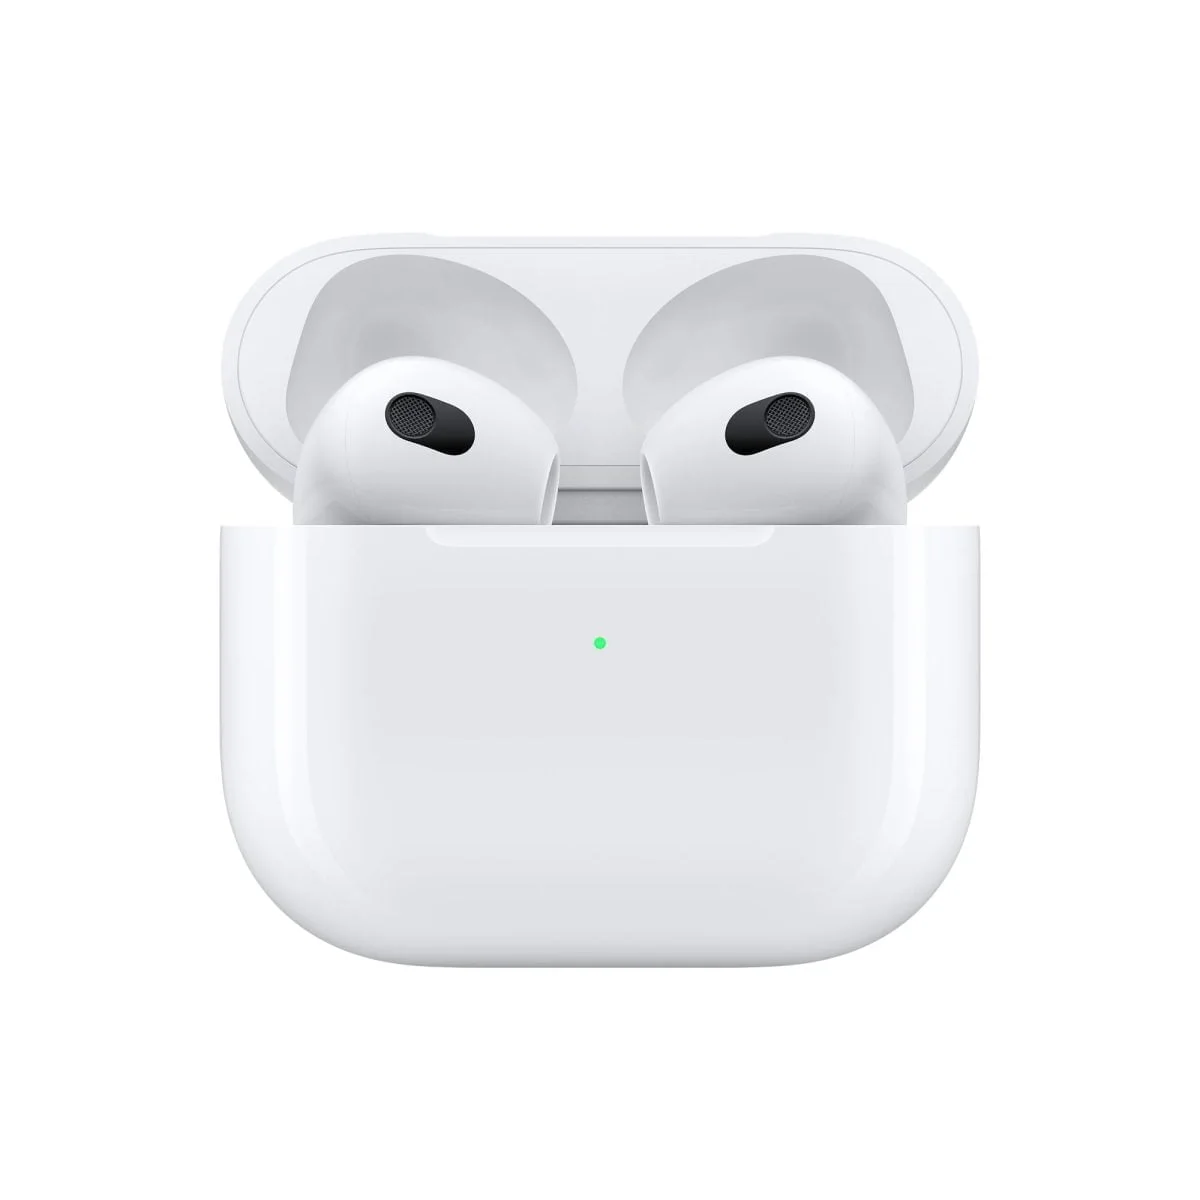 Mme73 Av2 Apple &Lt;H1&Gt;Apple Airpods (3Rd Generation) - White&Lt;/H1&Gt; &Lt;Div Class=&Quot;Rc-Pdsection-Mainpanel Column Large-9 Small-12&Quot;&Gt; &Lt;H2 Class=&Quot;H4-Para-Title&Quot;&Gt;All-New Design&Lt;/H2&Gt; &Lt;Div Class=&Quot;Para-List As-Pdp-Lastparalist&Quot;&Gt; Airpods Are Lightweight And Offer A Contoured Design. They Sit At Just The Right Angle For Comfort And To Better Direct Audio To Your Ear. The Stem Is 33 Percent Shorter Than Airpods (2Nd Generation) And Includes A Force Sensor To Easily Control Music And Calls. &Lt;/Div&Gt; &Lt;/Div&Gt; Apple Airpods Apple Airpods (3Rd Generation) - White (Mme73)